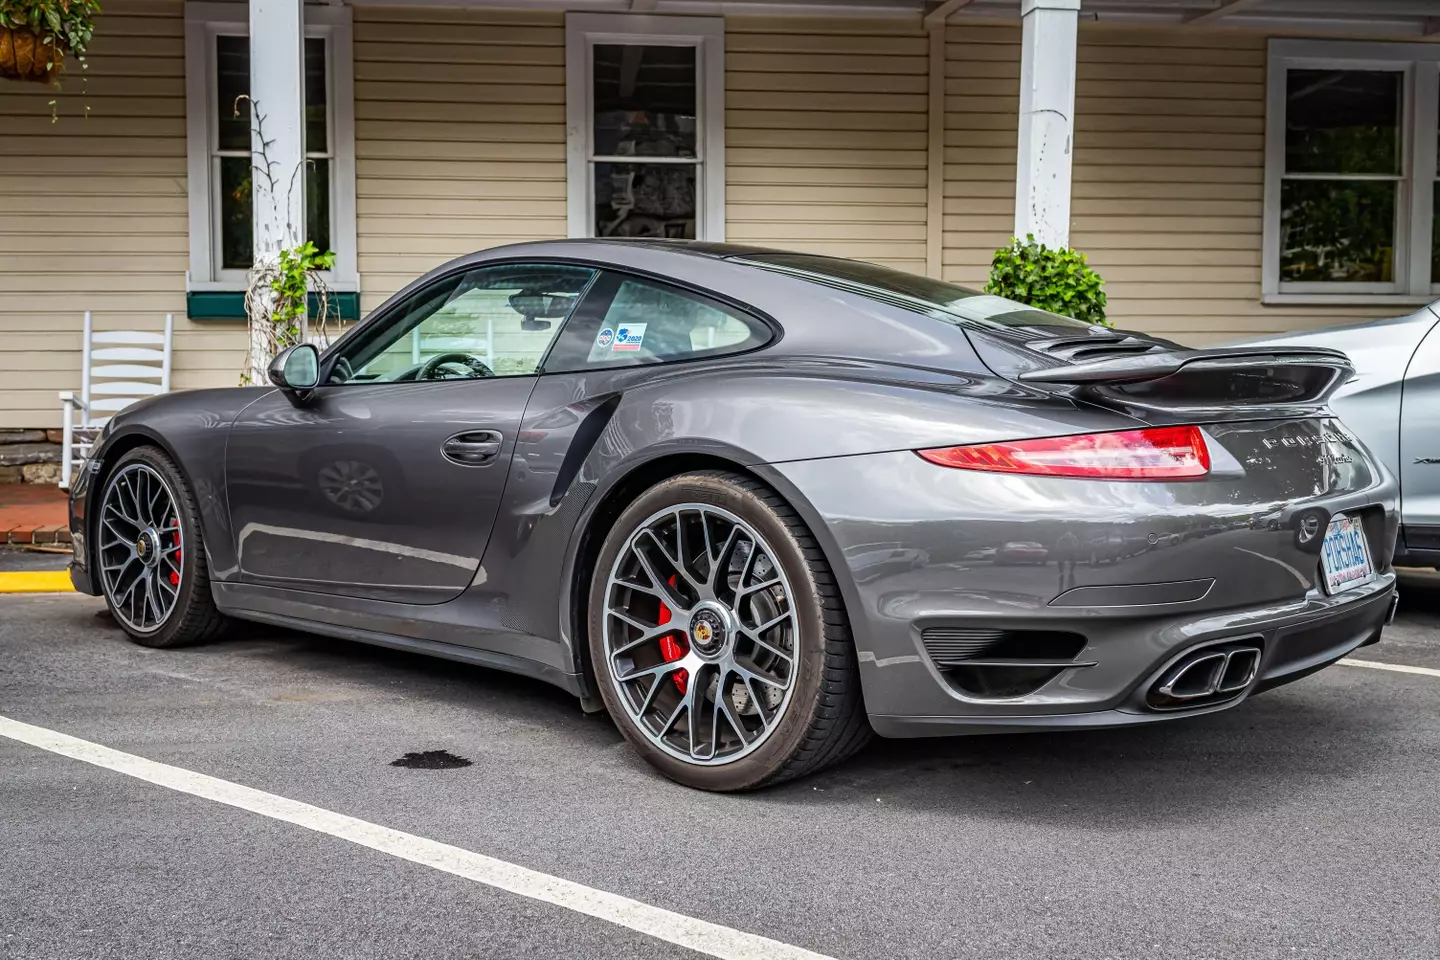 A Porsche 911 Turbo S, which Floyd Mayweather recently purchased, is valued at around £270,098 ($330,000).